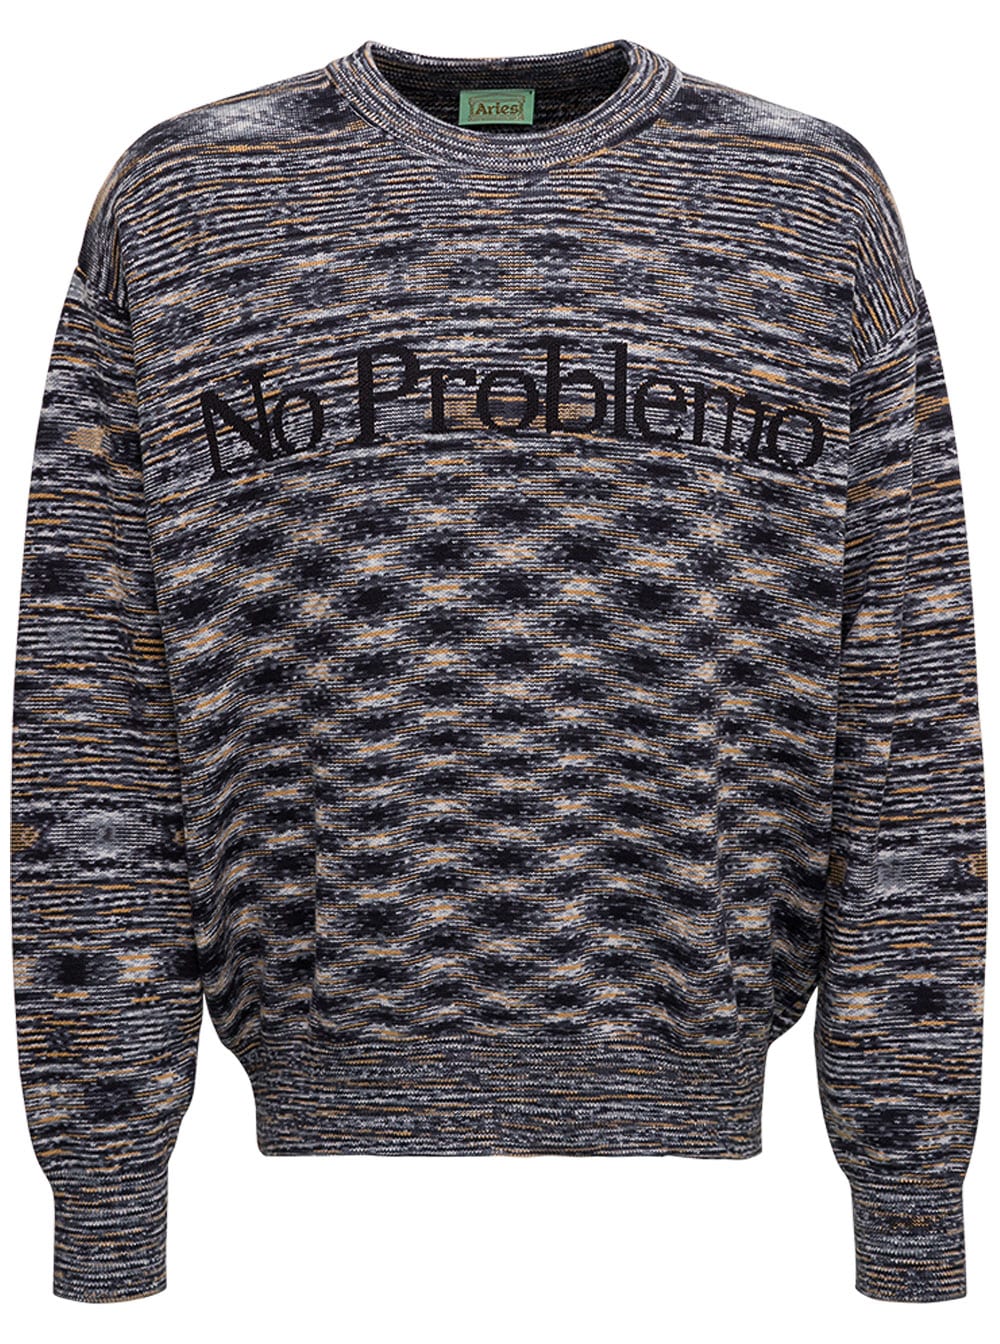 Aries Cotton Blend Sweater With No Problemo Front Print